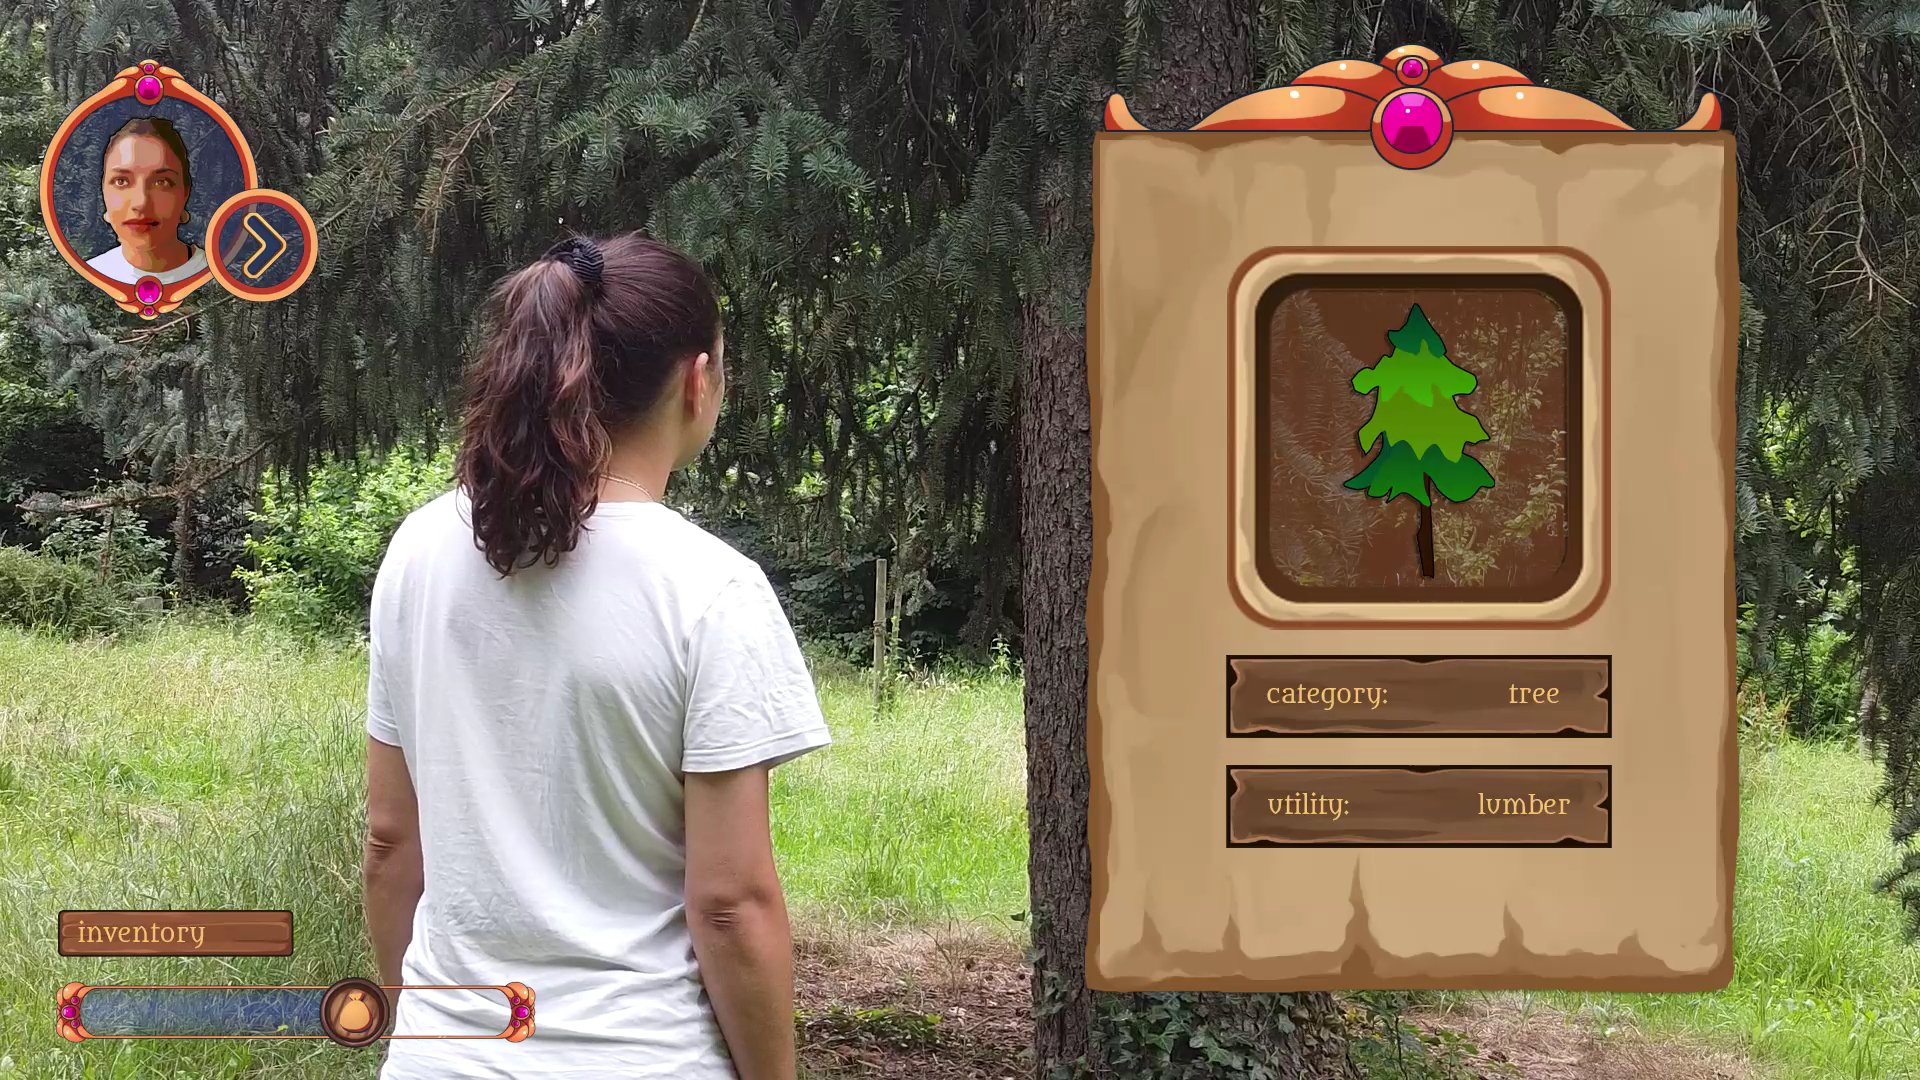 Screenshot from the video, Eve is looking at the pine tree still but the interface has shifted to a cartoony rpg-style display, labeling the tree with `utility: lumber`